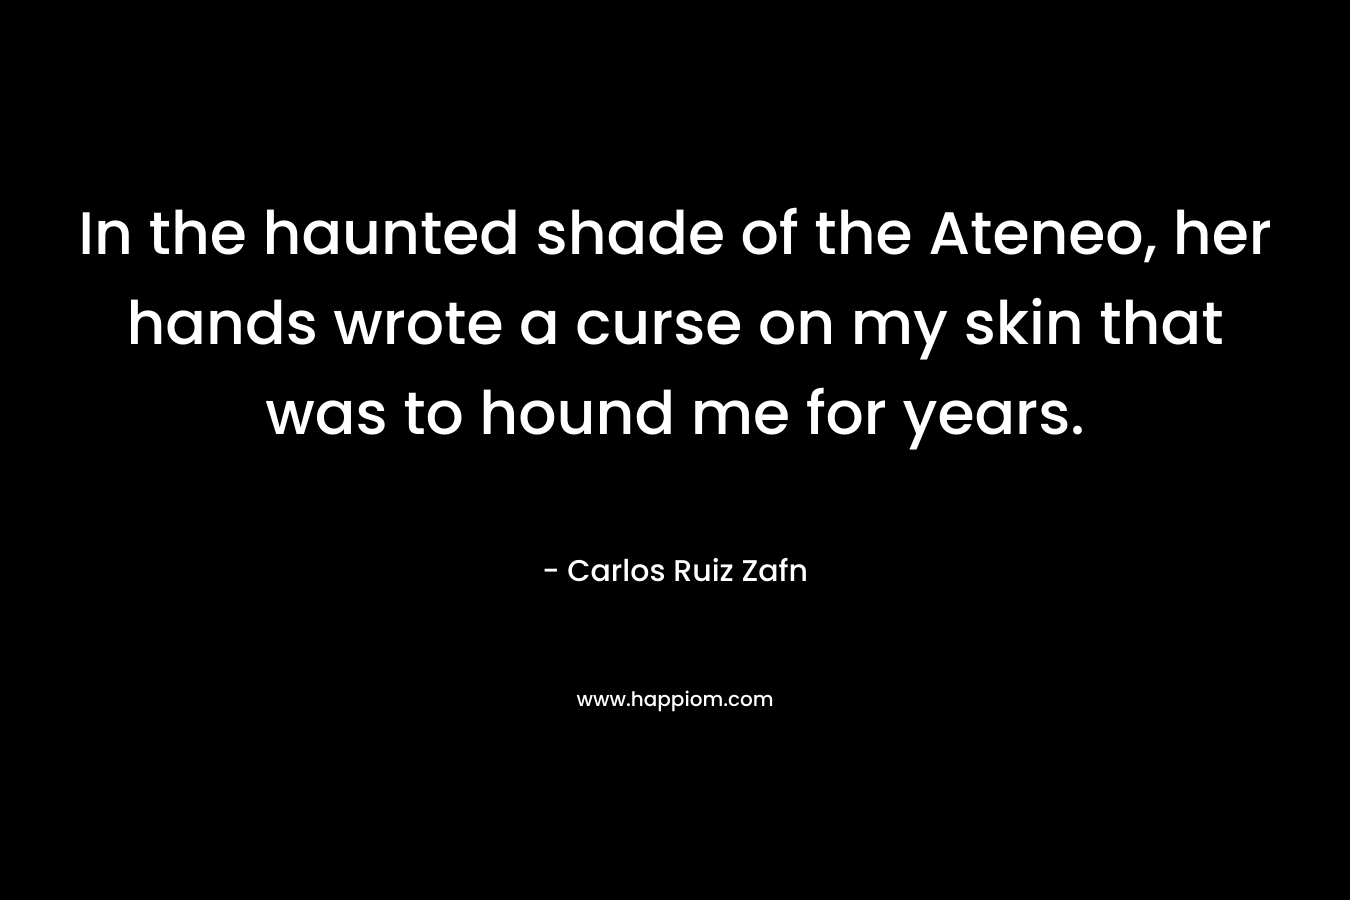 In the haunted shade of the Ateneo, her hands wrote a curse on my skin that was to hound me for years. – Carlos Ruiz Zafn